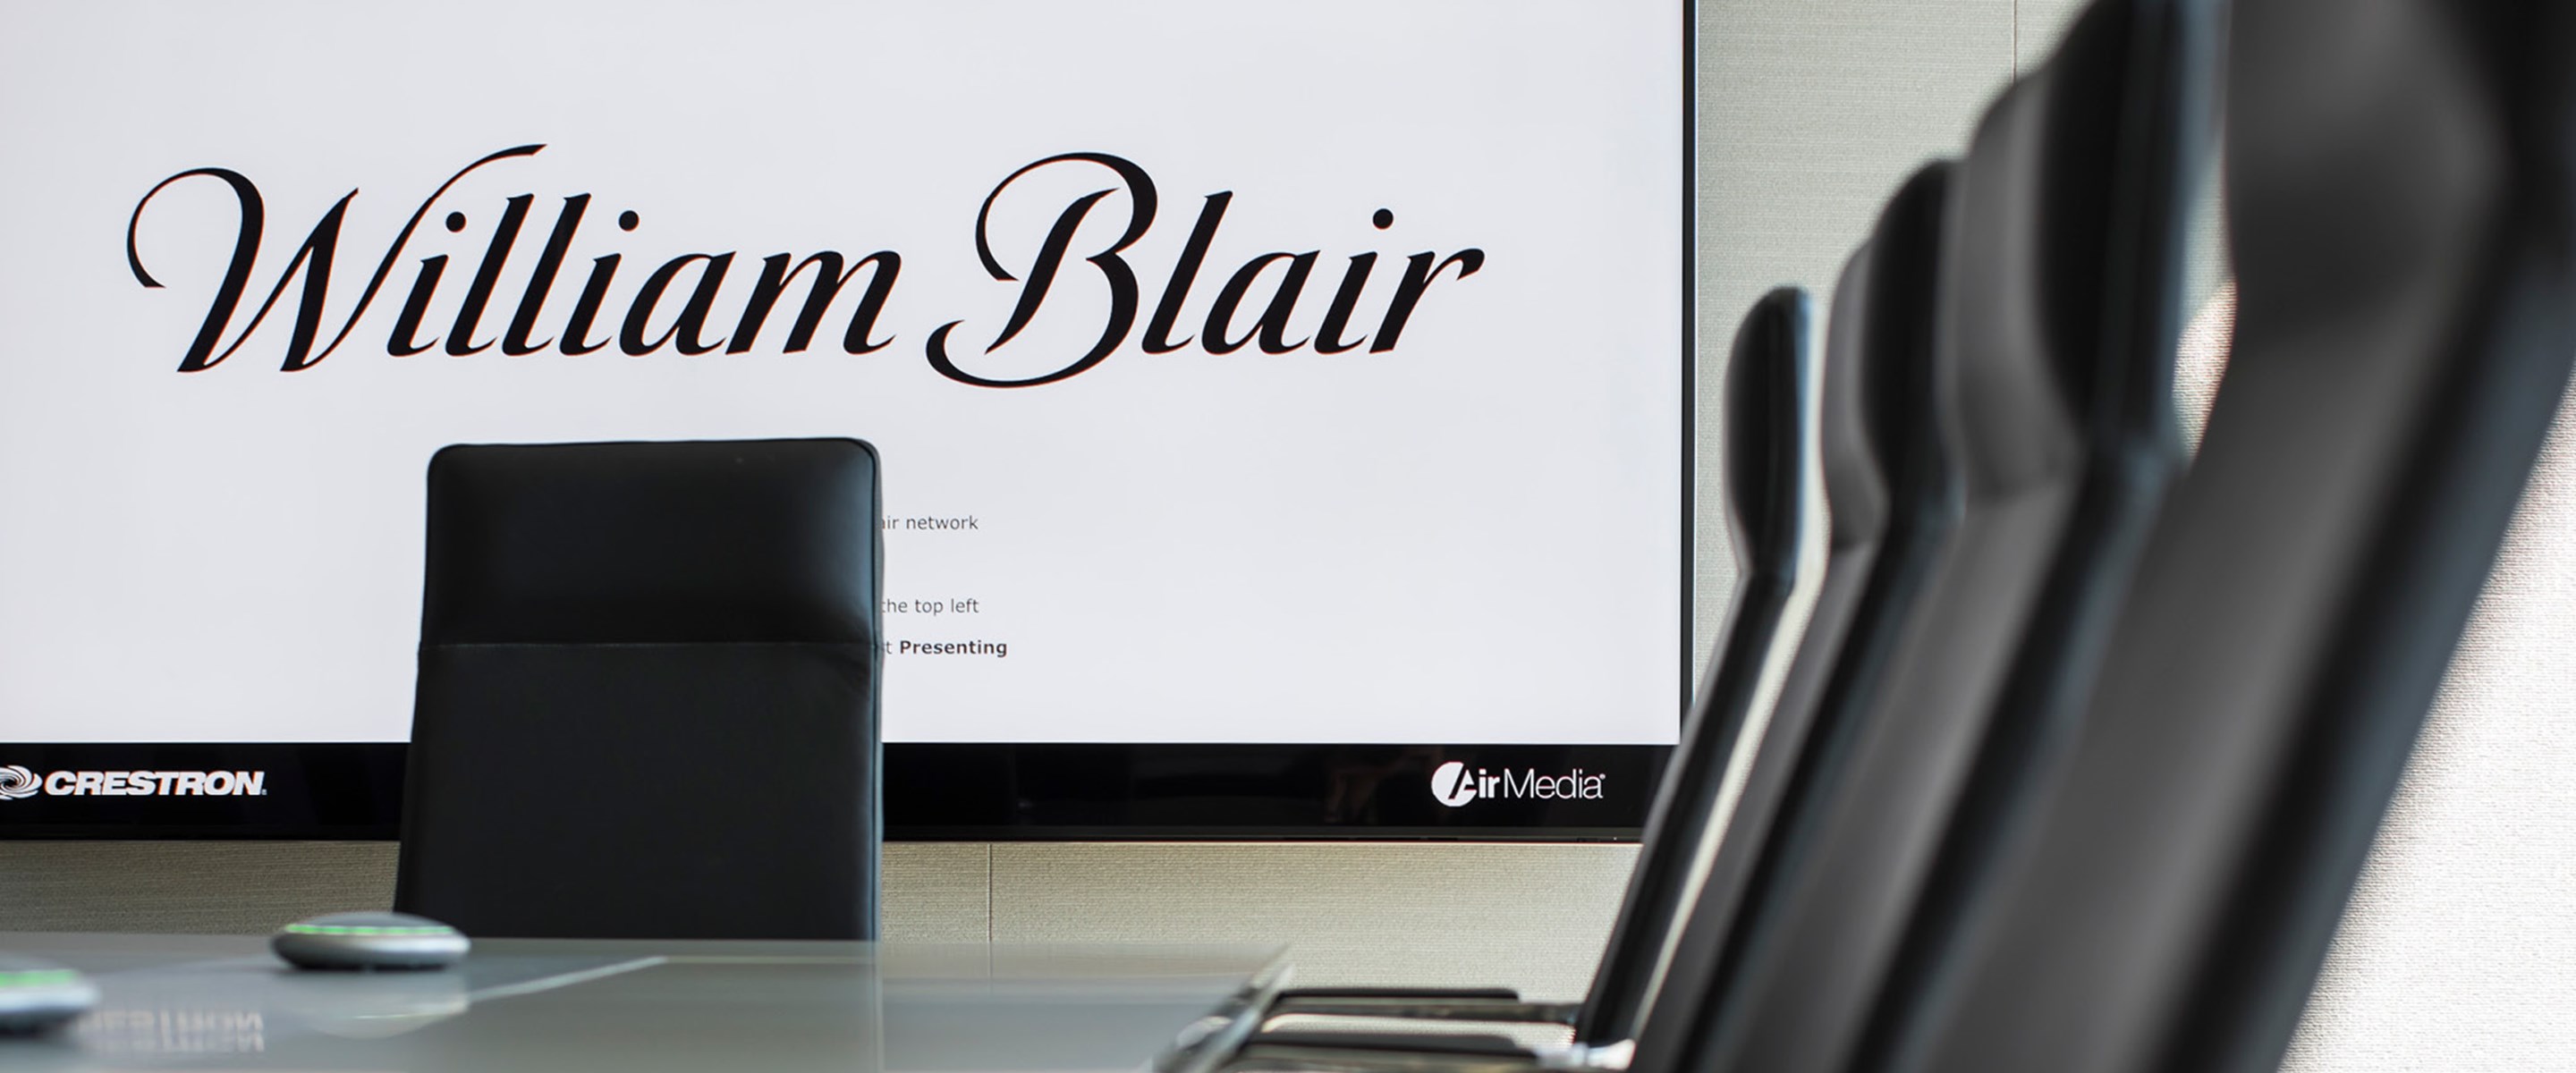 William Blair conference room